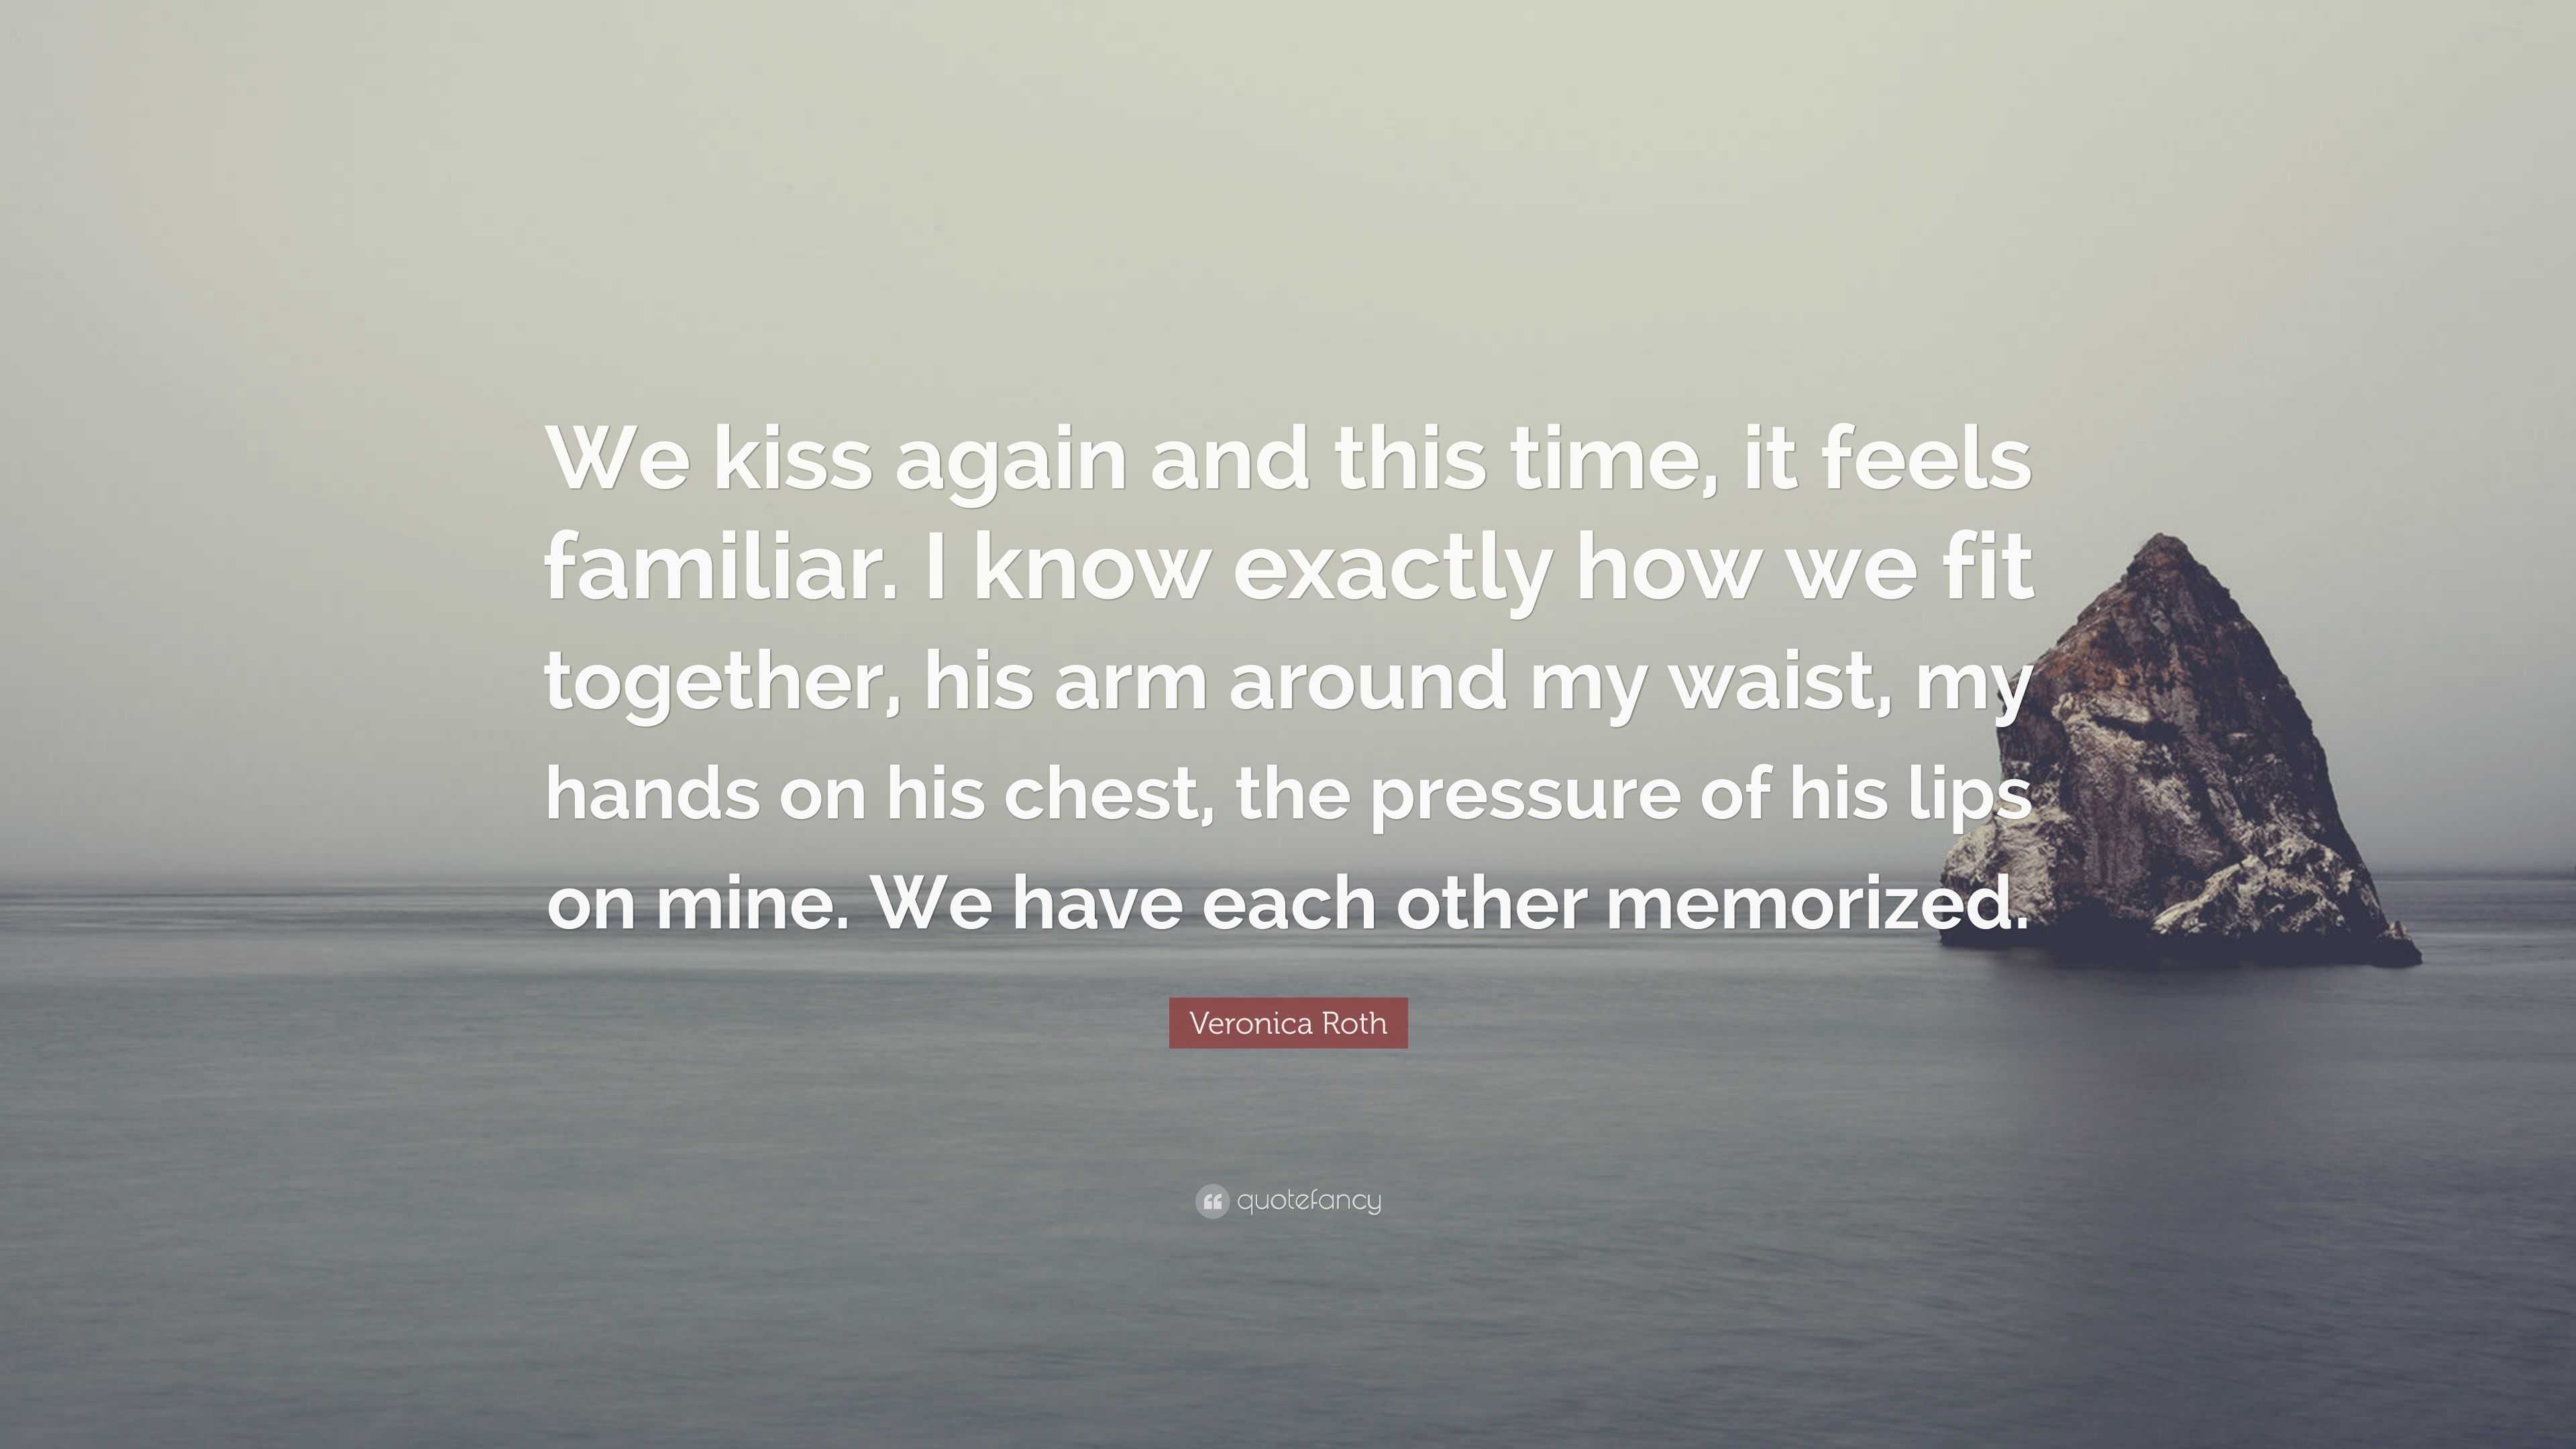 Veronica Roth Quote We Kiss Again And This Time It Feels Images, Photos, Reviews